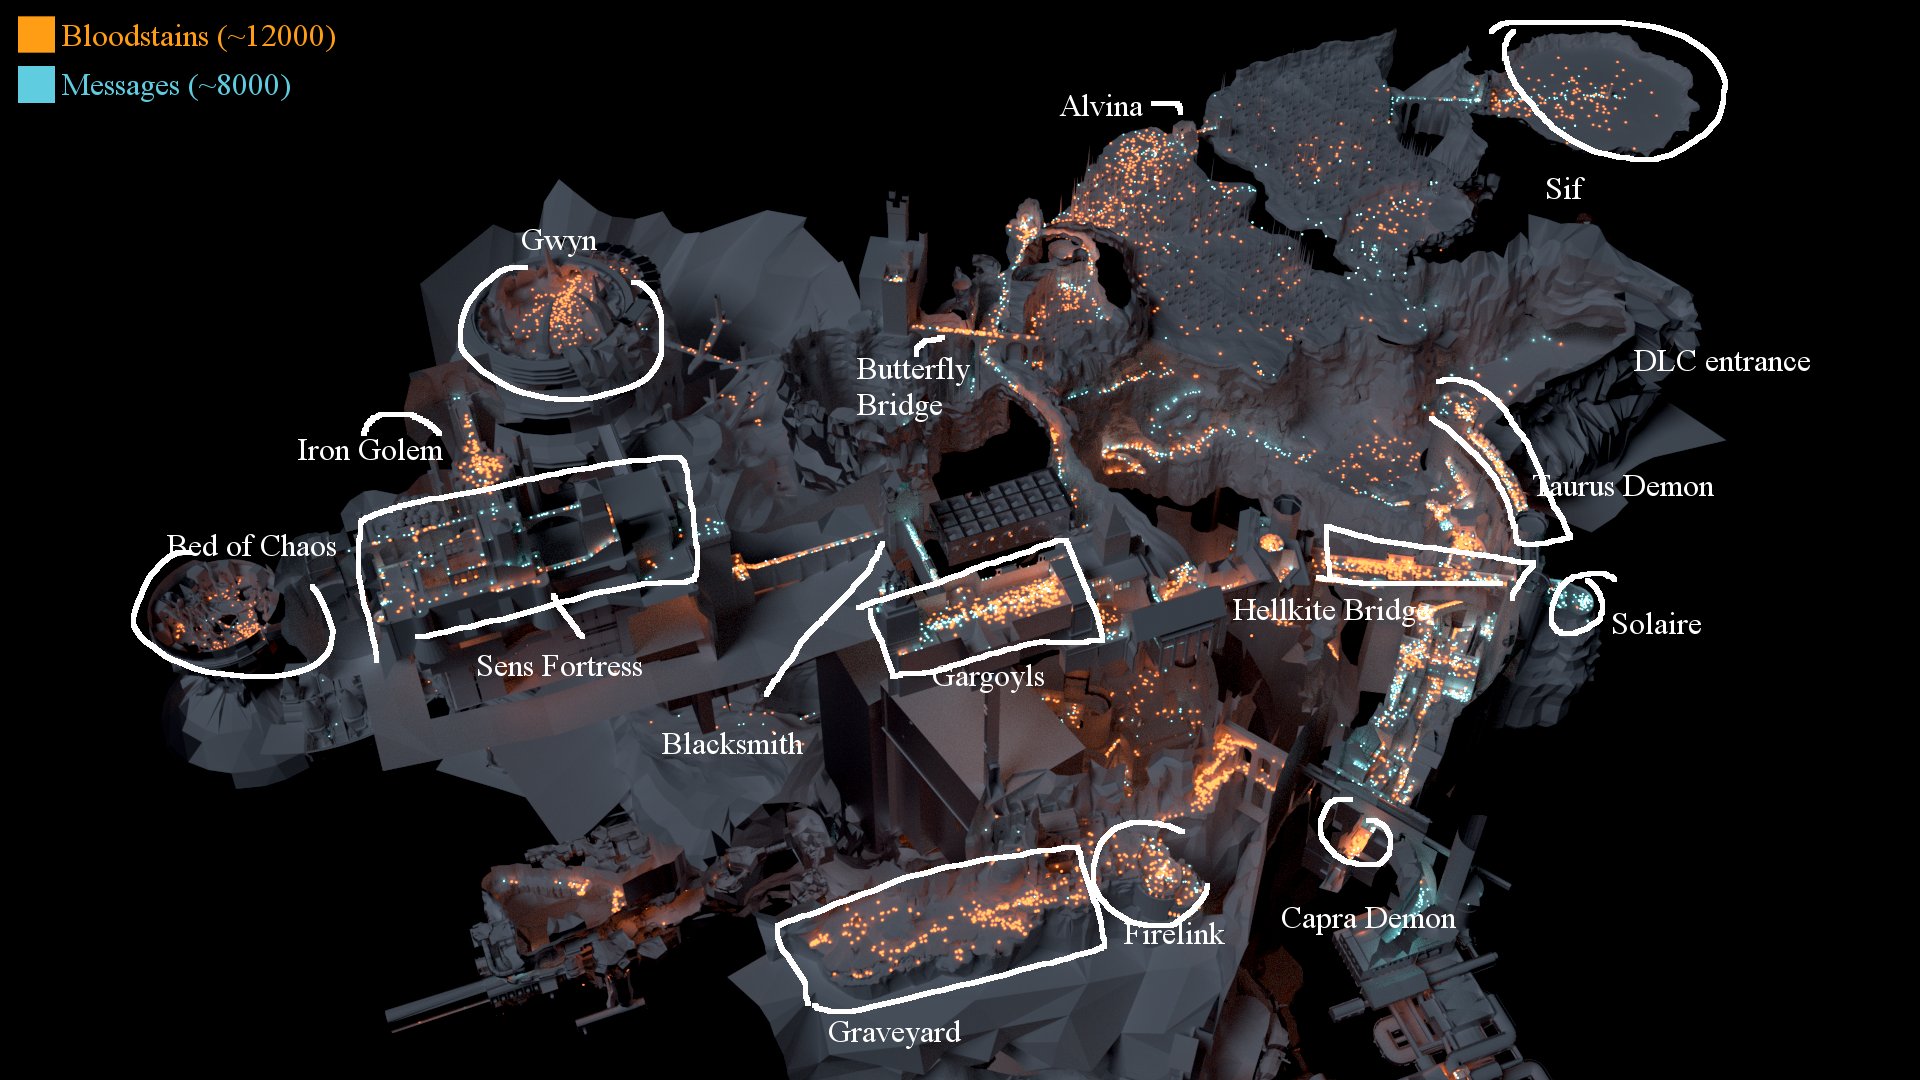 dark-souls-death-map-reveals-data-about-where-players-struggle-the-most